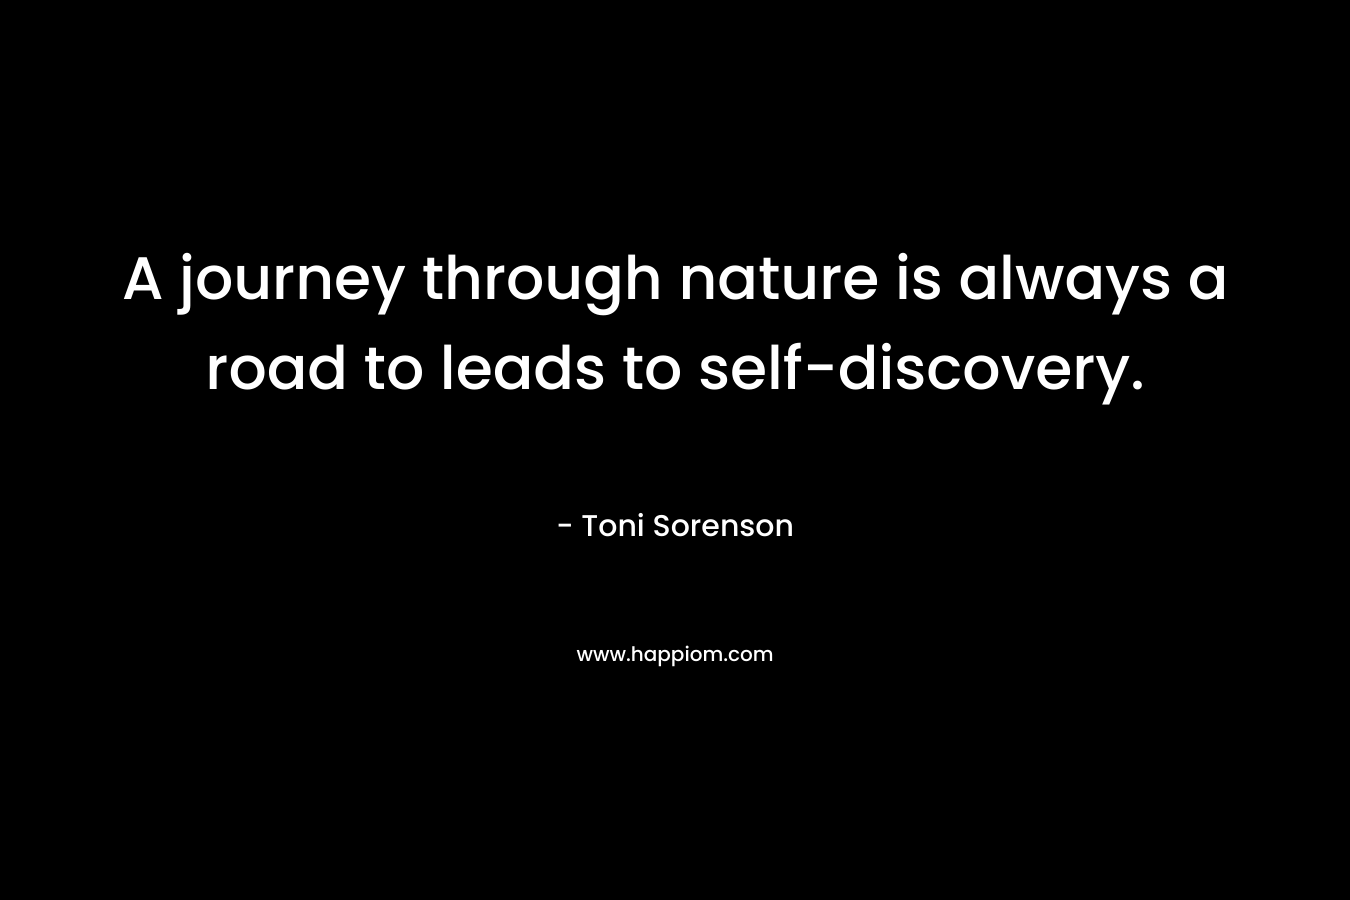 A journey through nature is always a road to leads to self-discovery. – Toni Sorenson